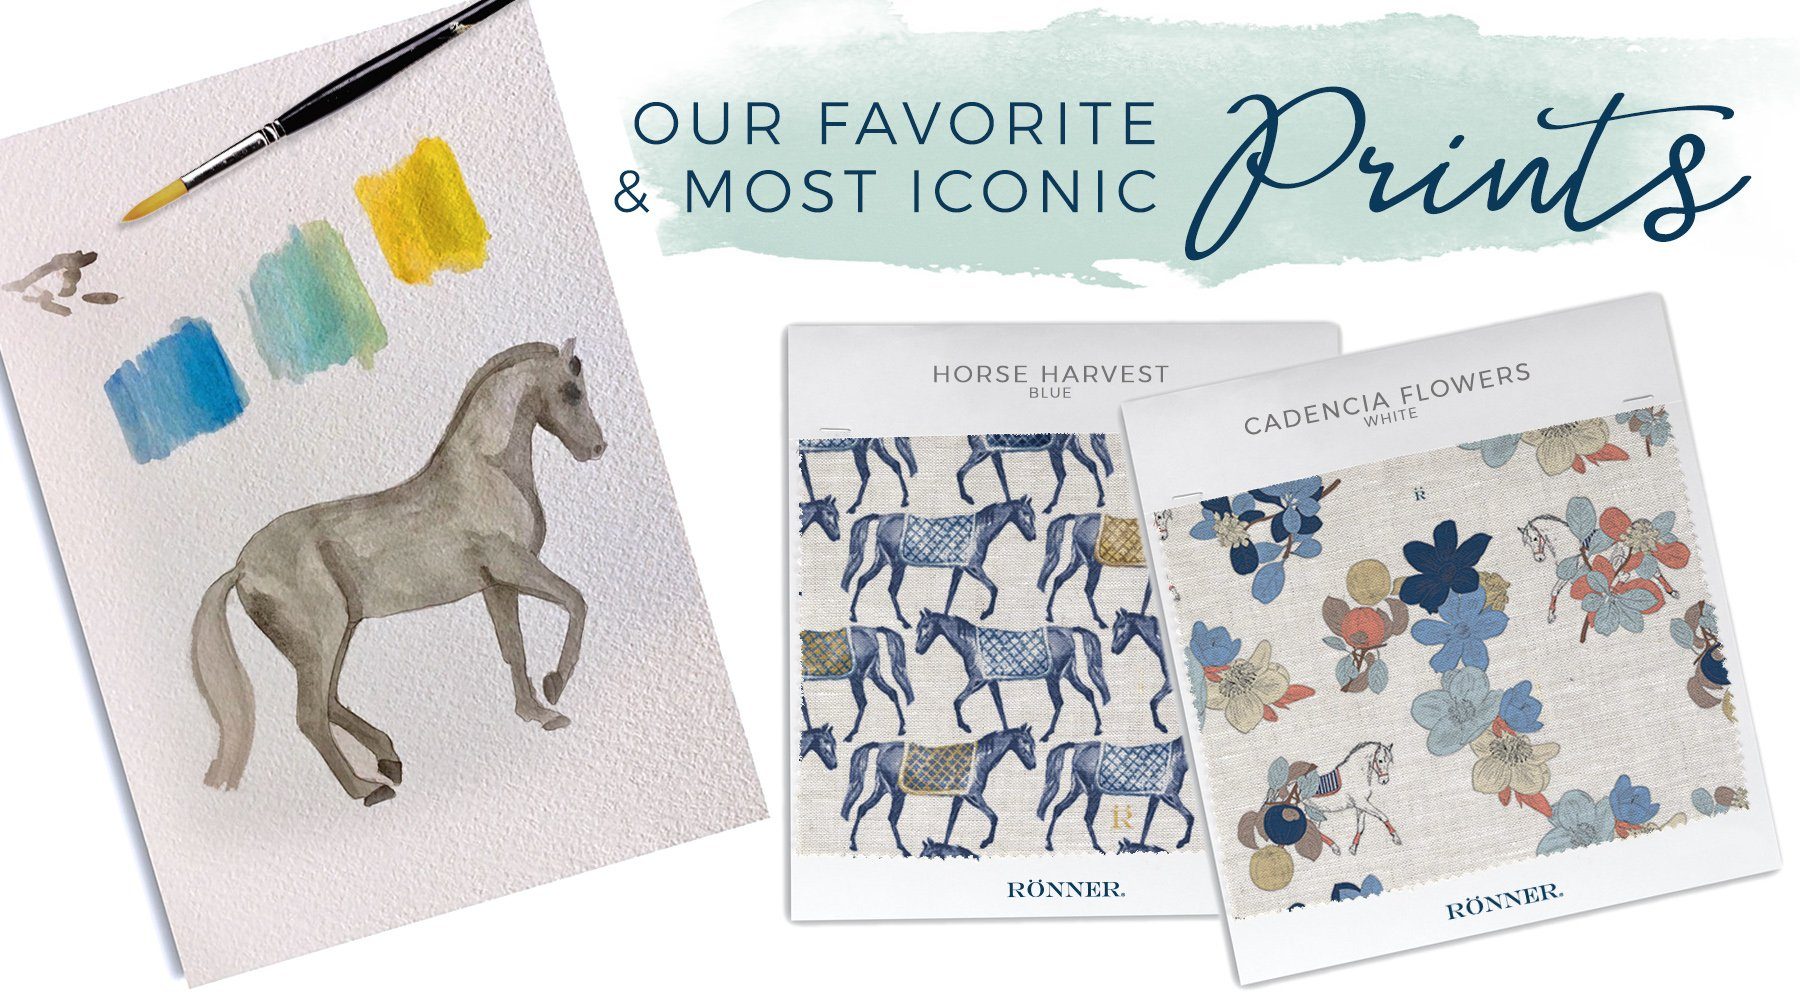 Our favorite and most iconic equestrian-prints